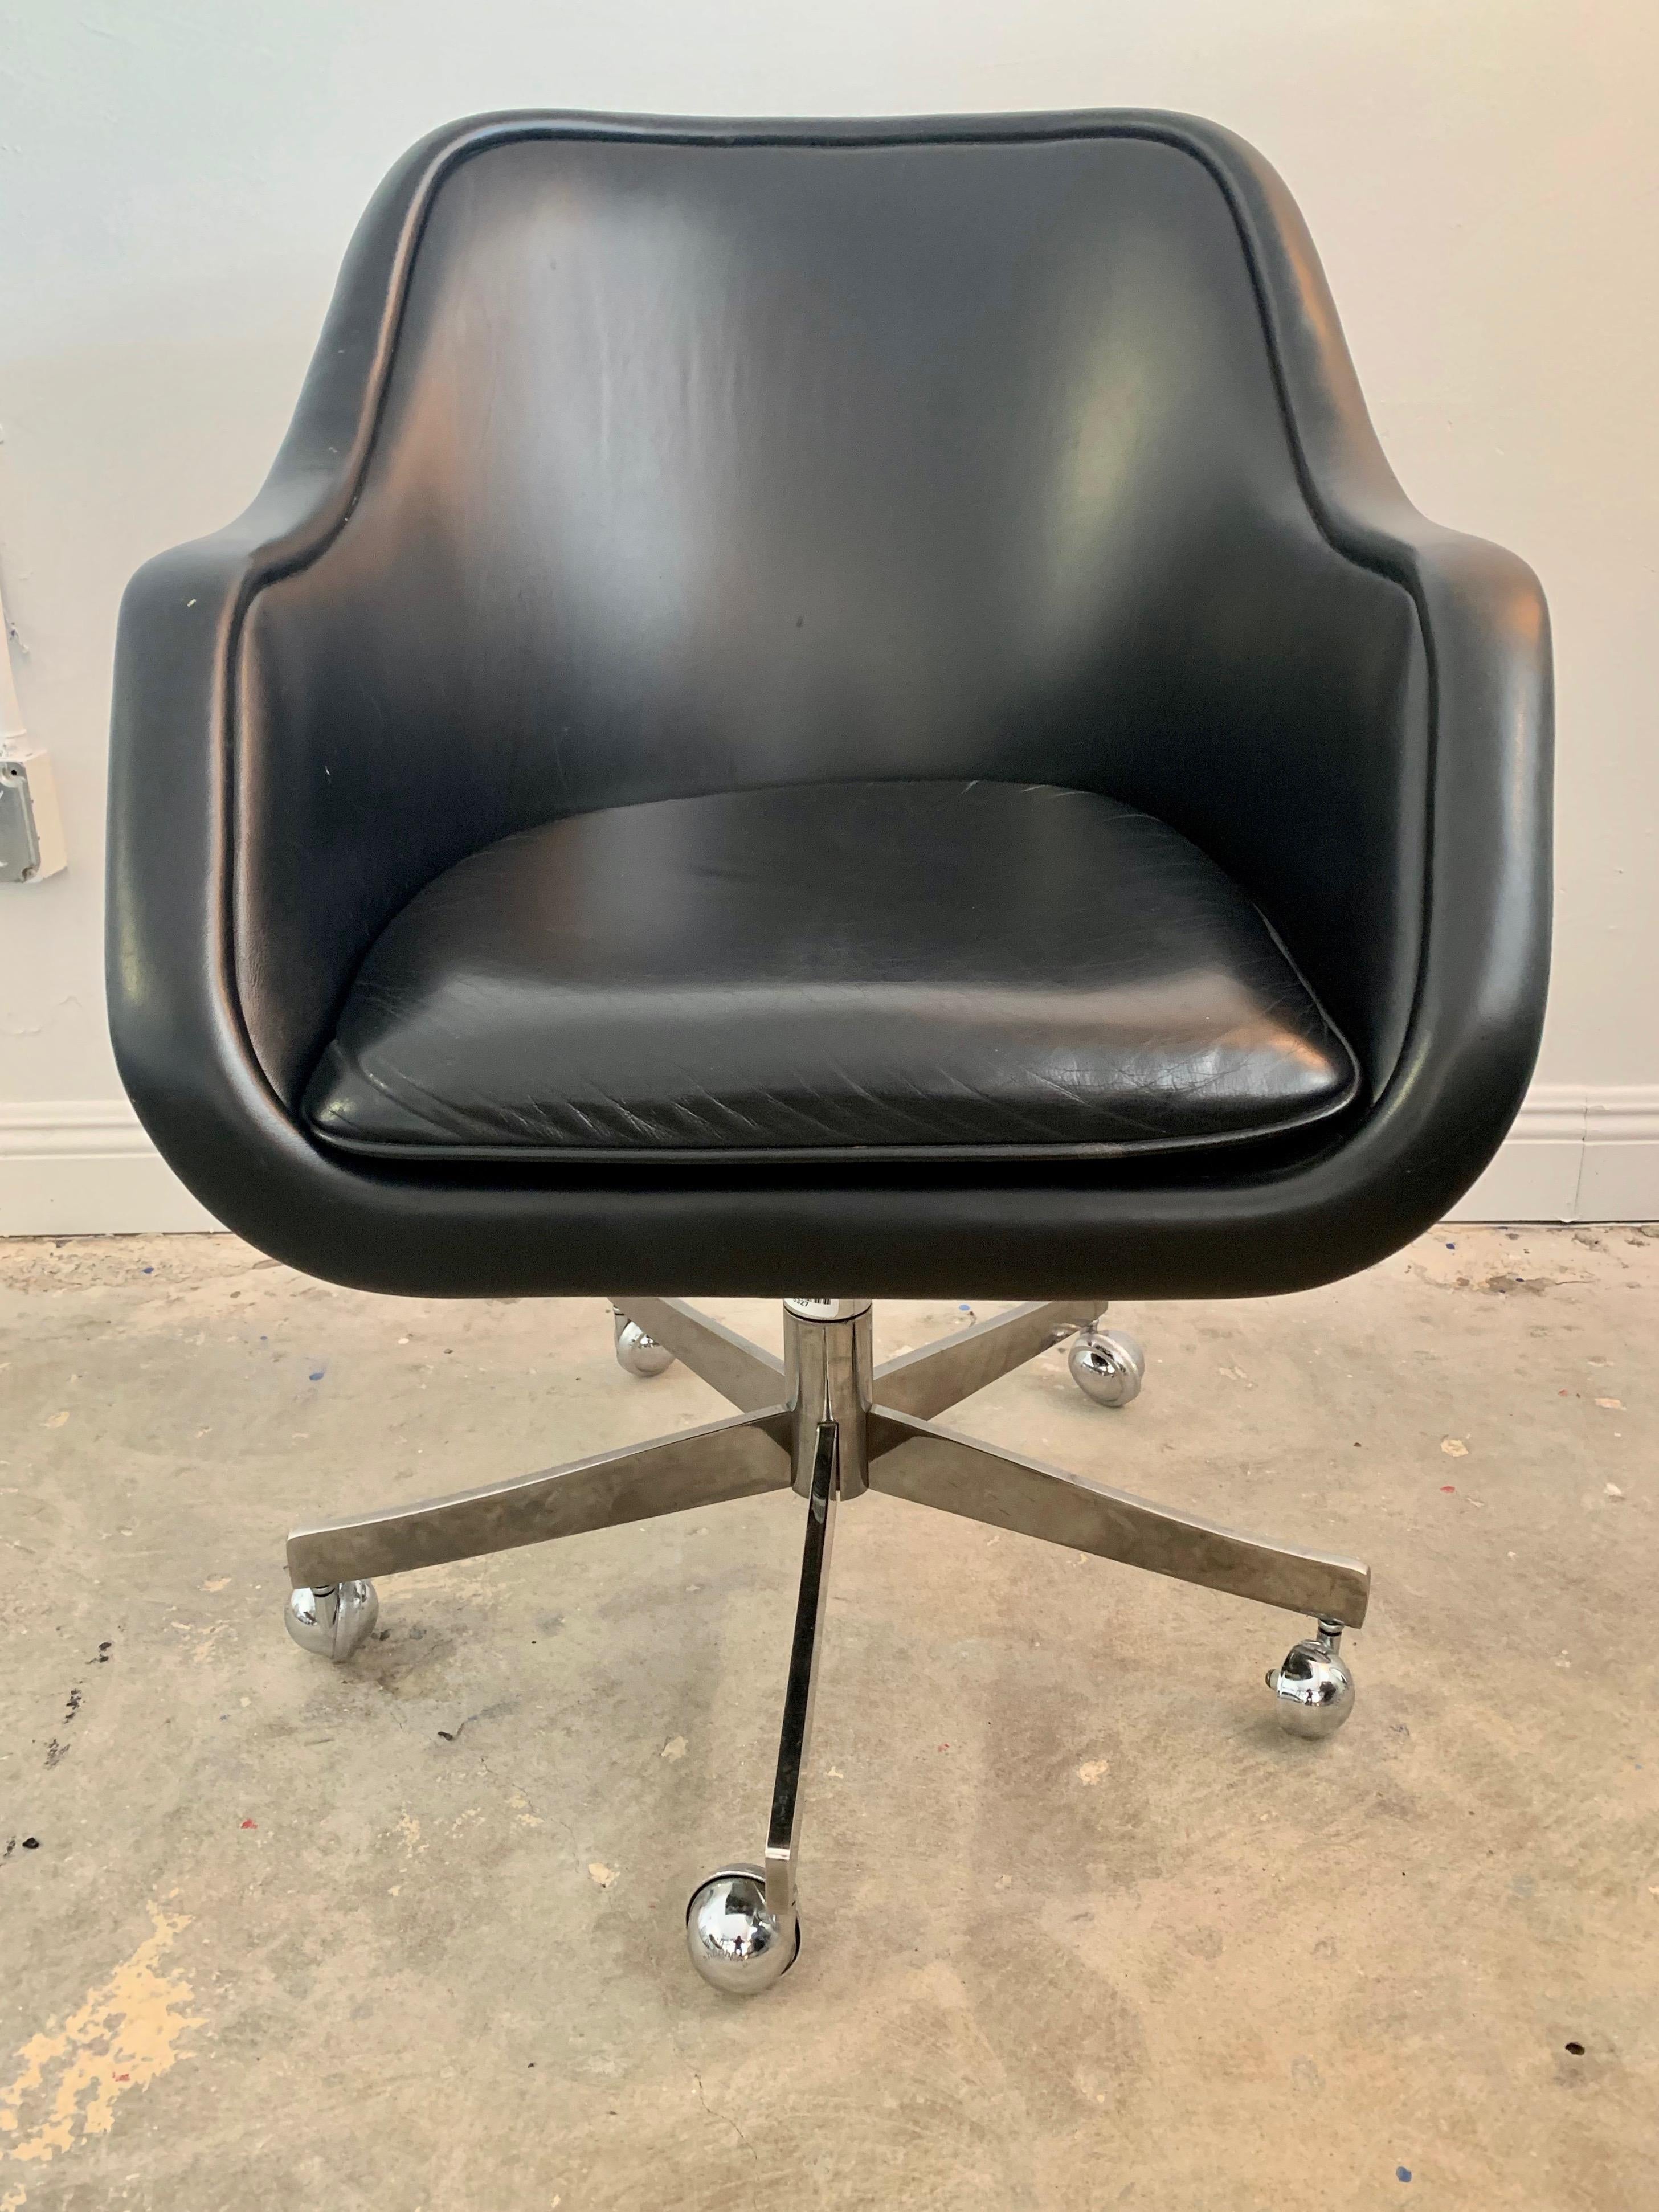 Elegant leather desk chair by Ward Bennett for Brickell Associates. Original tags. Nickel base. Reclines and swivels. Height is adjustable. Great vintage condition. Terribly comfortable.